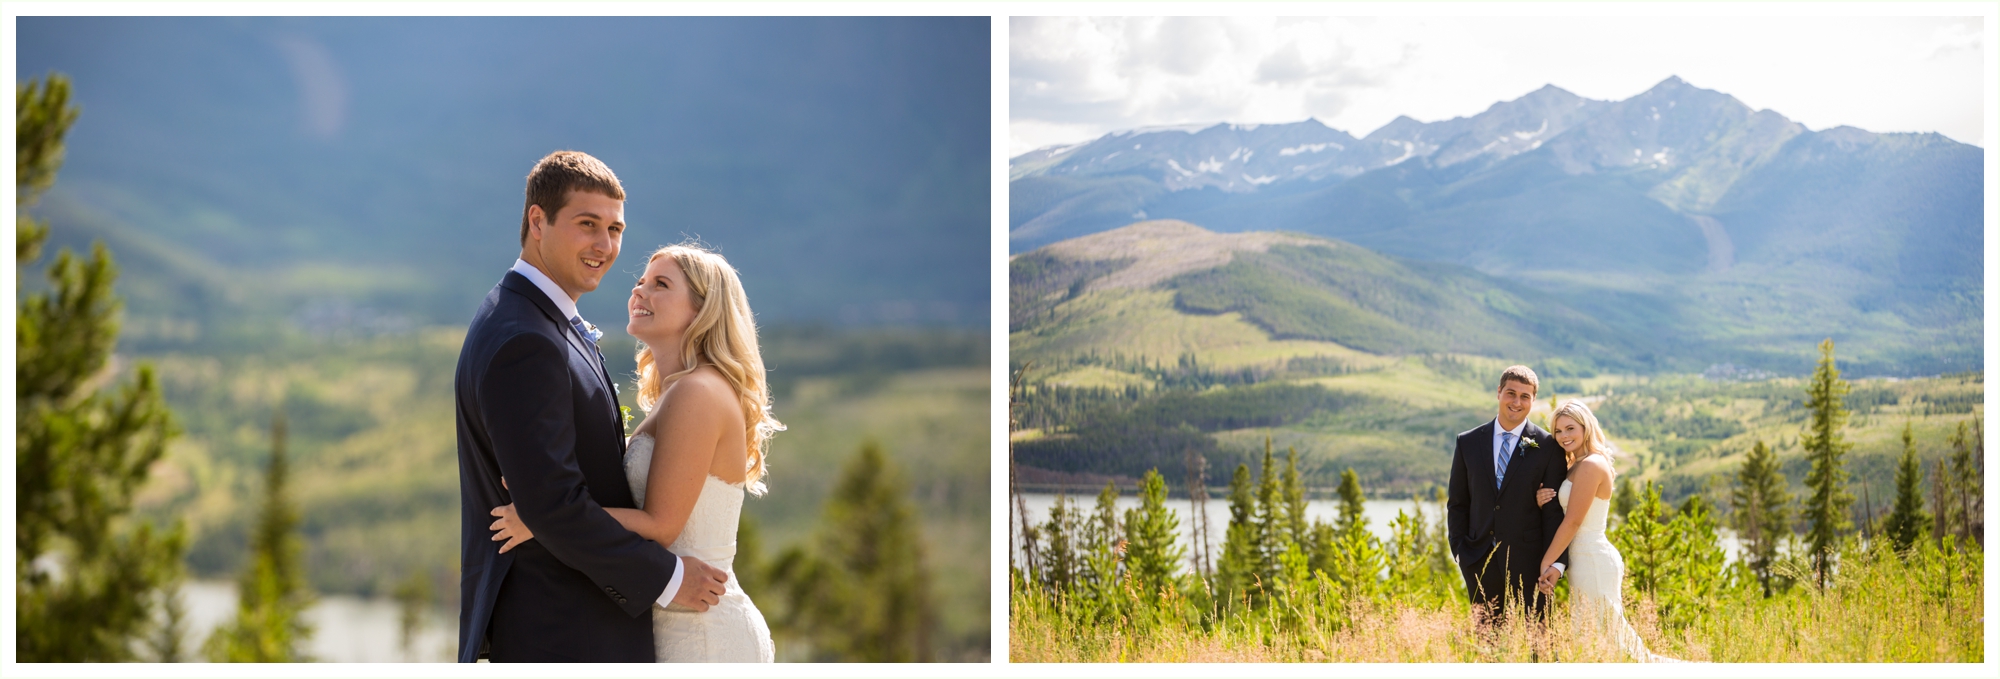 bride and groom candid romantic natural wedding portraits at sapphire point overlook lake dillon